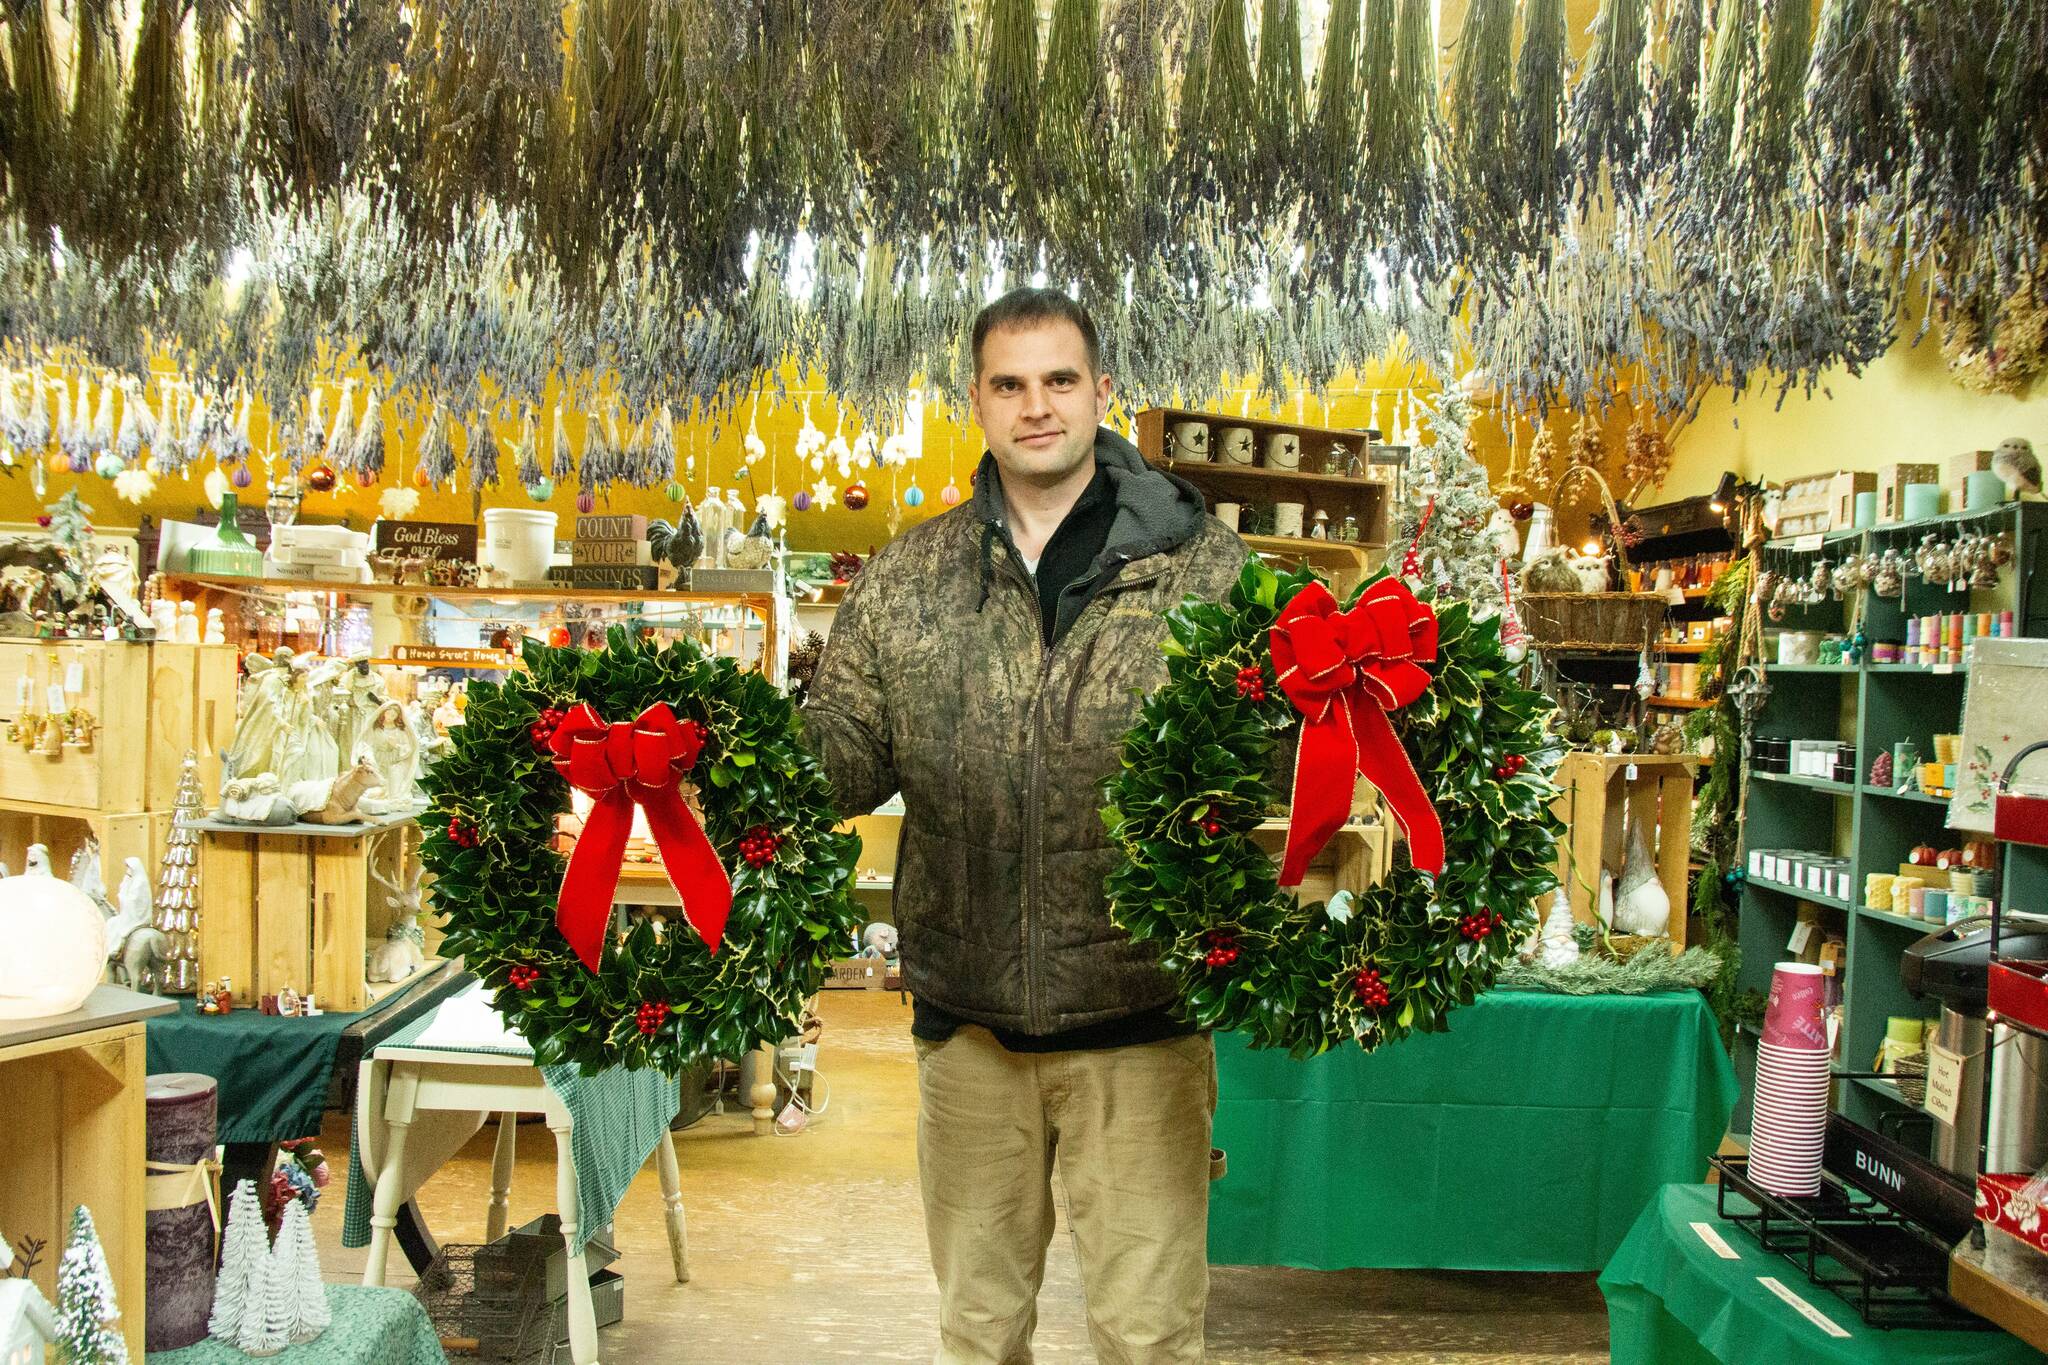 Isaiah Rawl, greens manager at A Knot in Thyme, poses with some freshly made wreaths inside of the gift shop. (Photo by Luisa Loi)